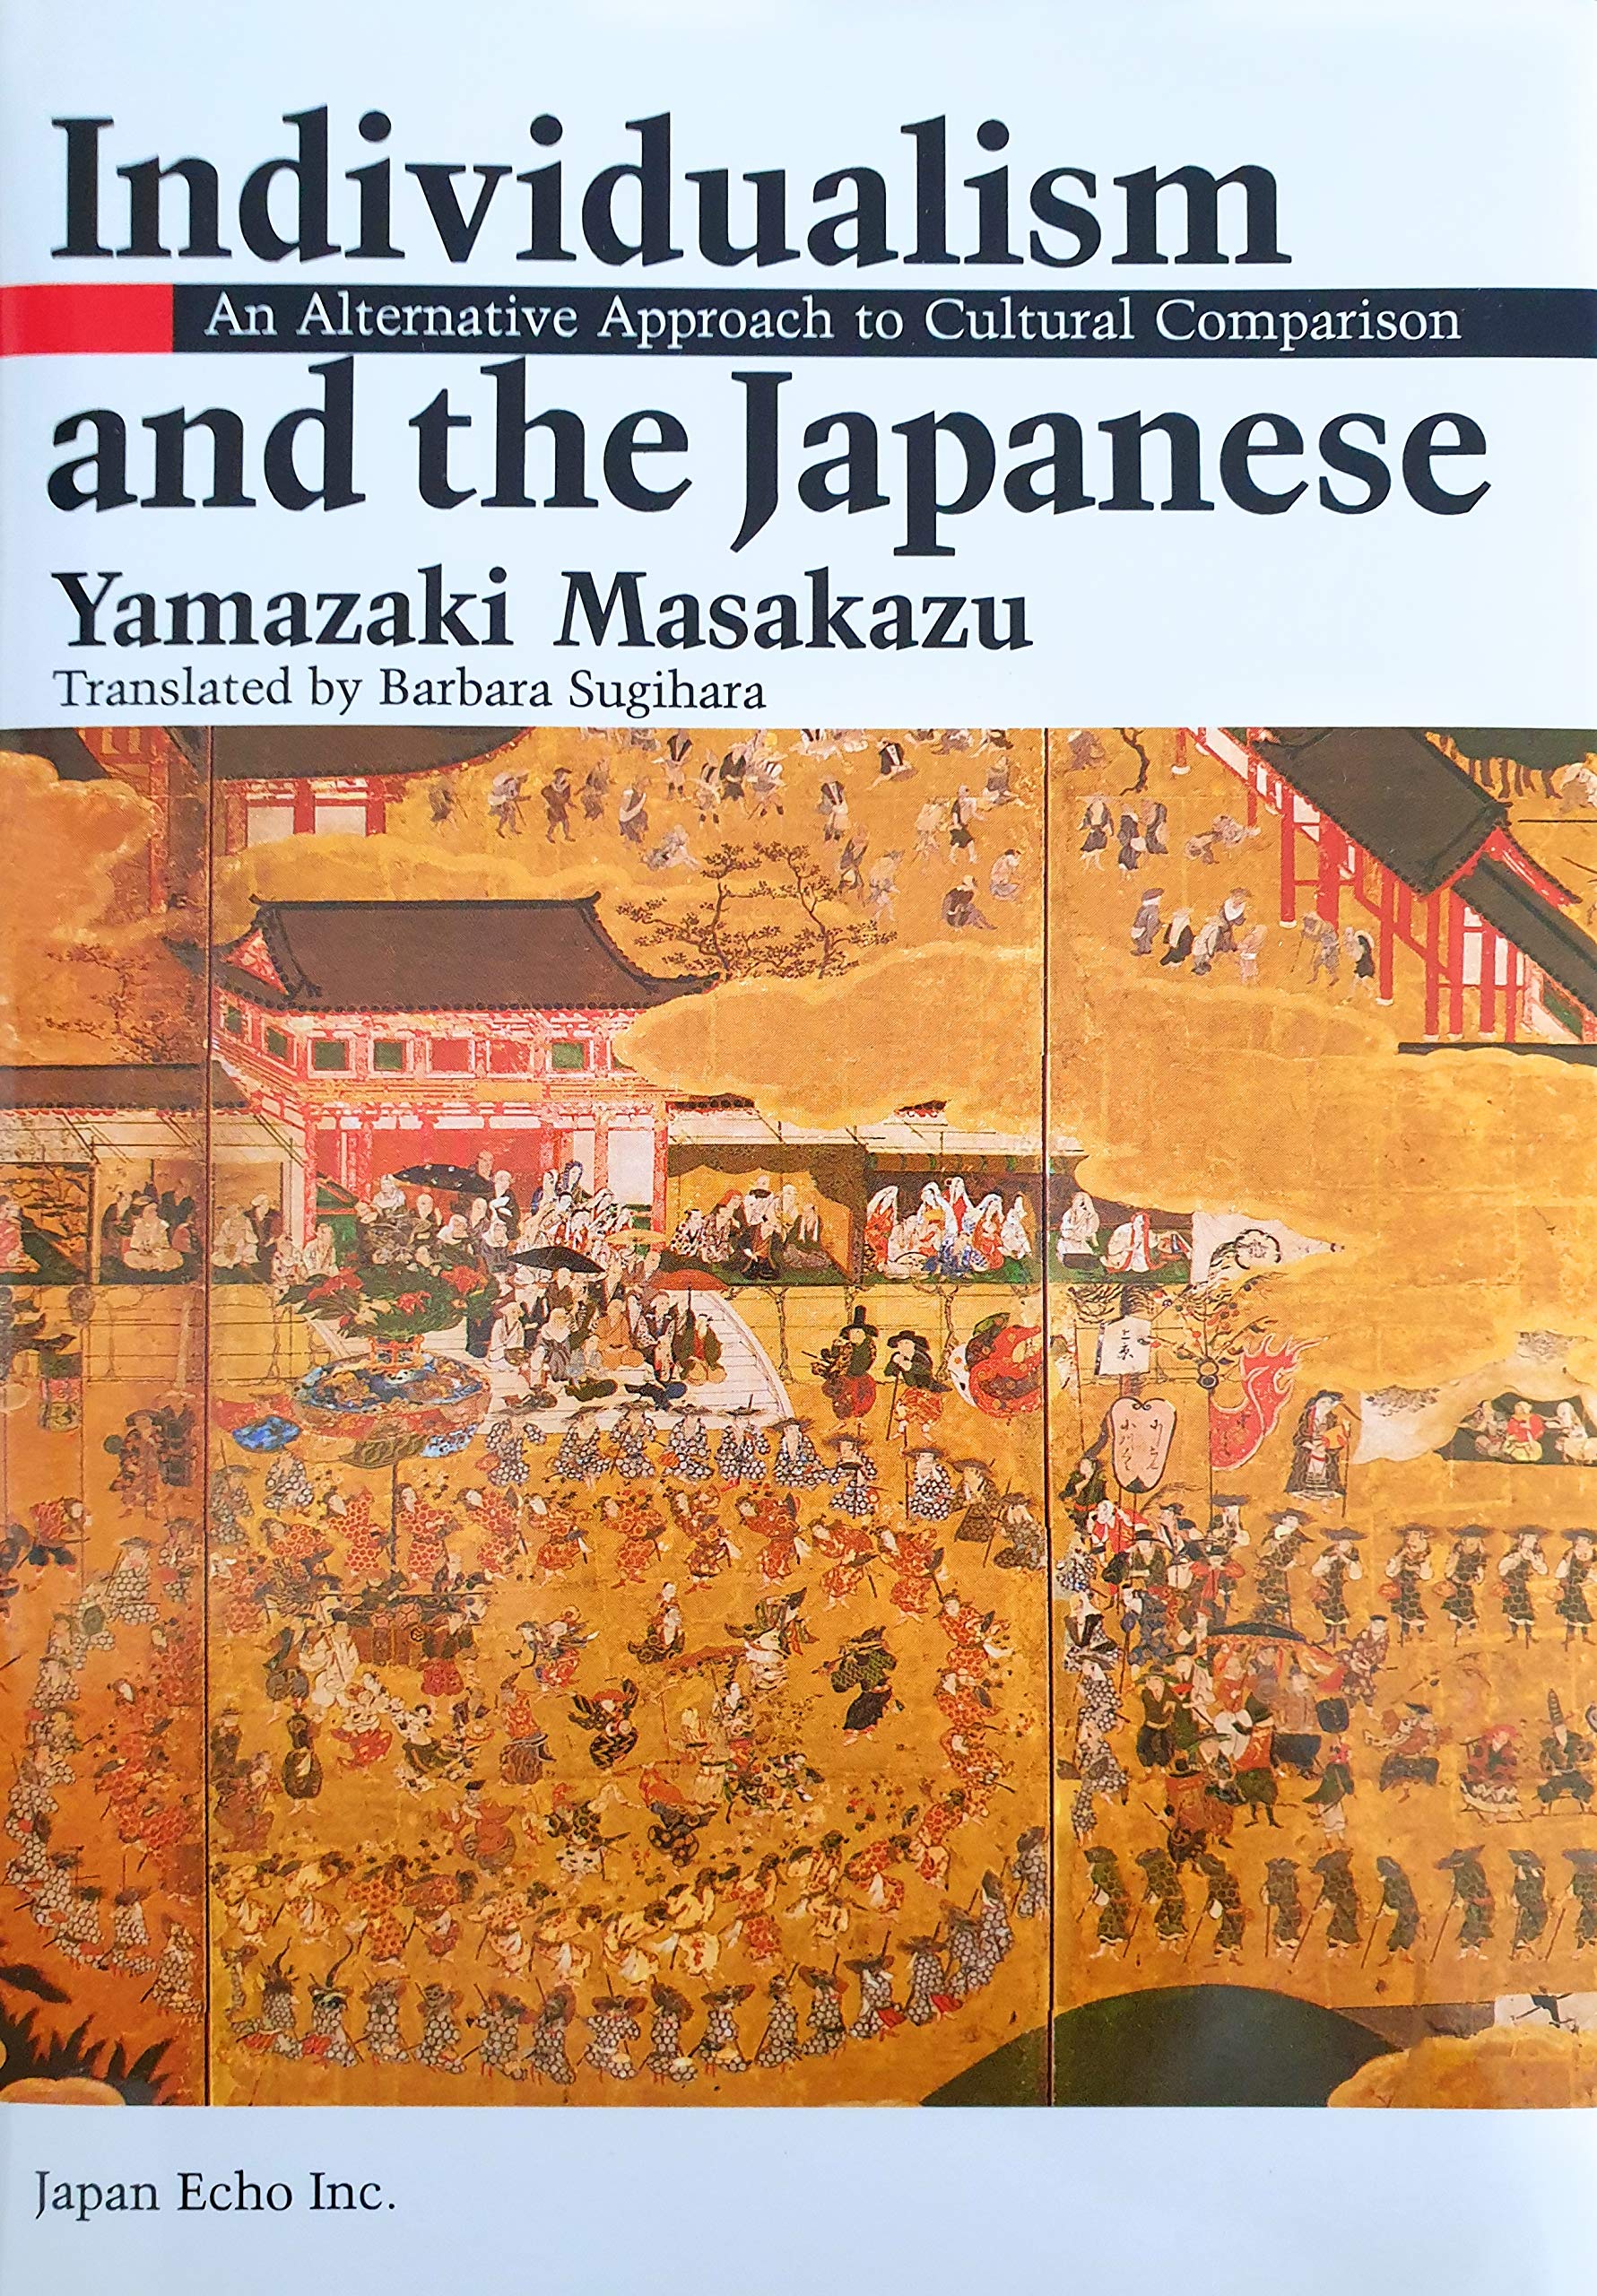 individualism and the japanese: an alternative approach to cultural comparison